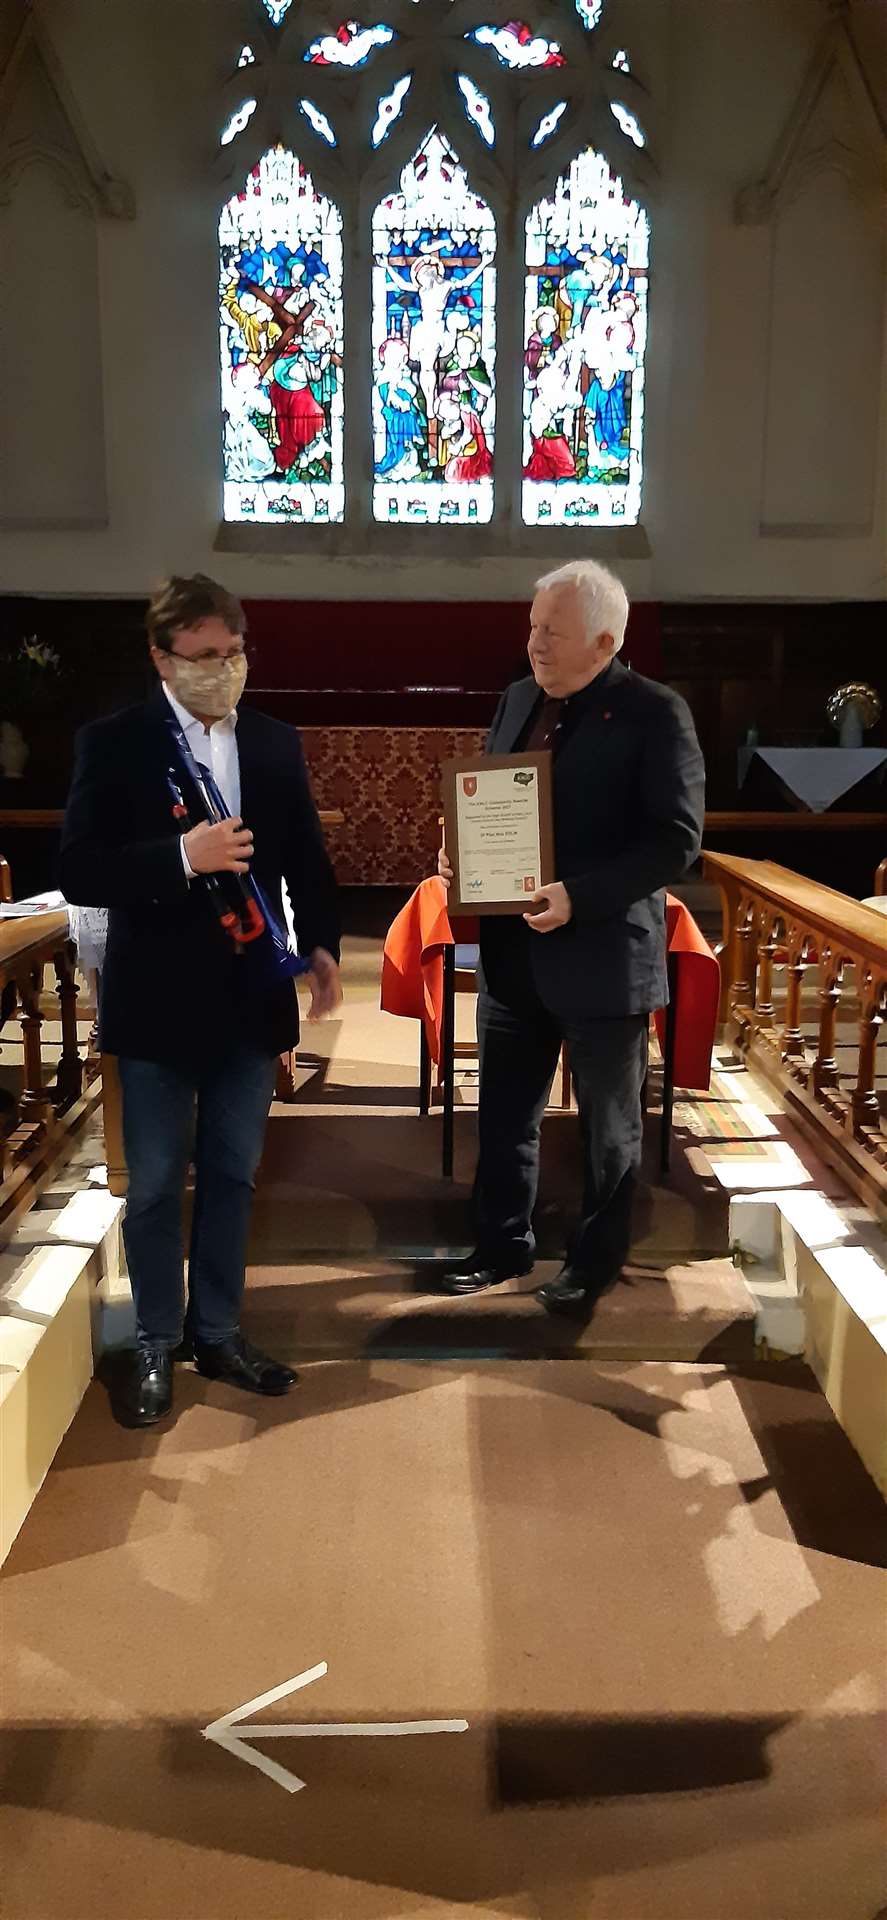 Dr Paul Edlin of Deal Deal Music & Arts has brought music tuition to hundreds who would have otherwise never had the opportunity. He is awarded by Walmer Parish Council chairman Cllr James Murray.